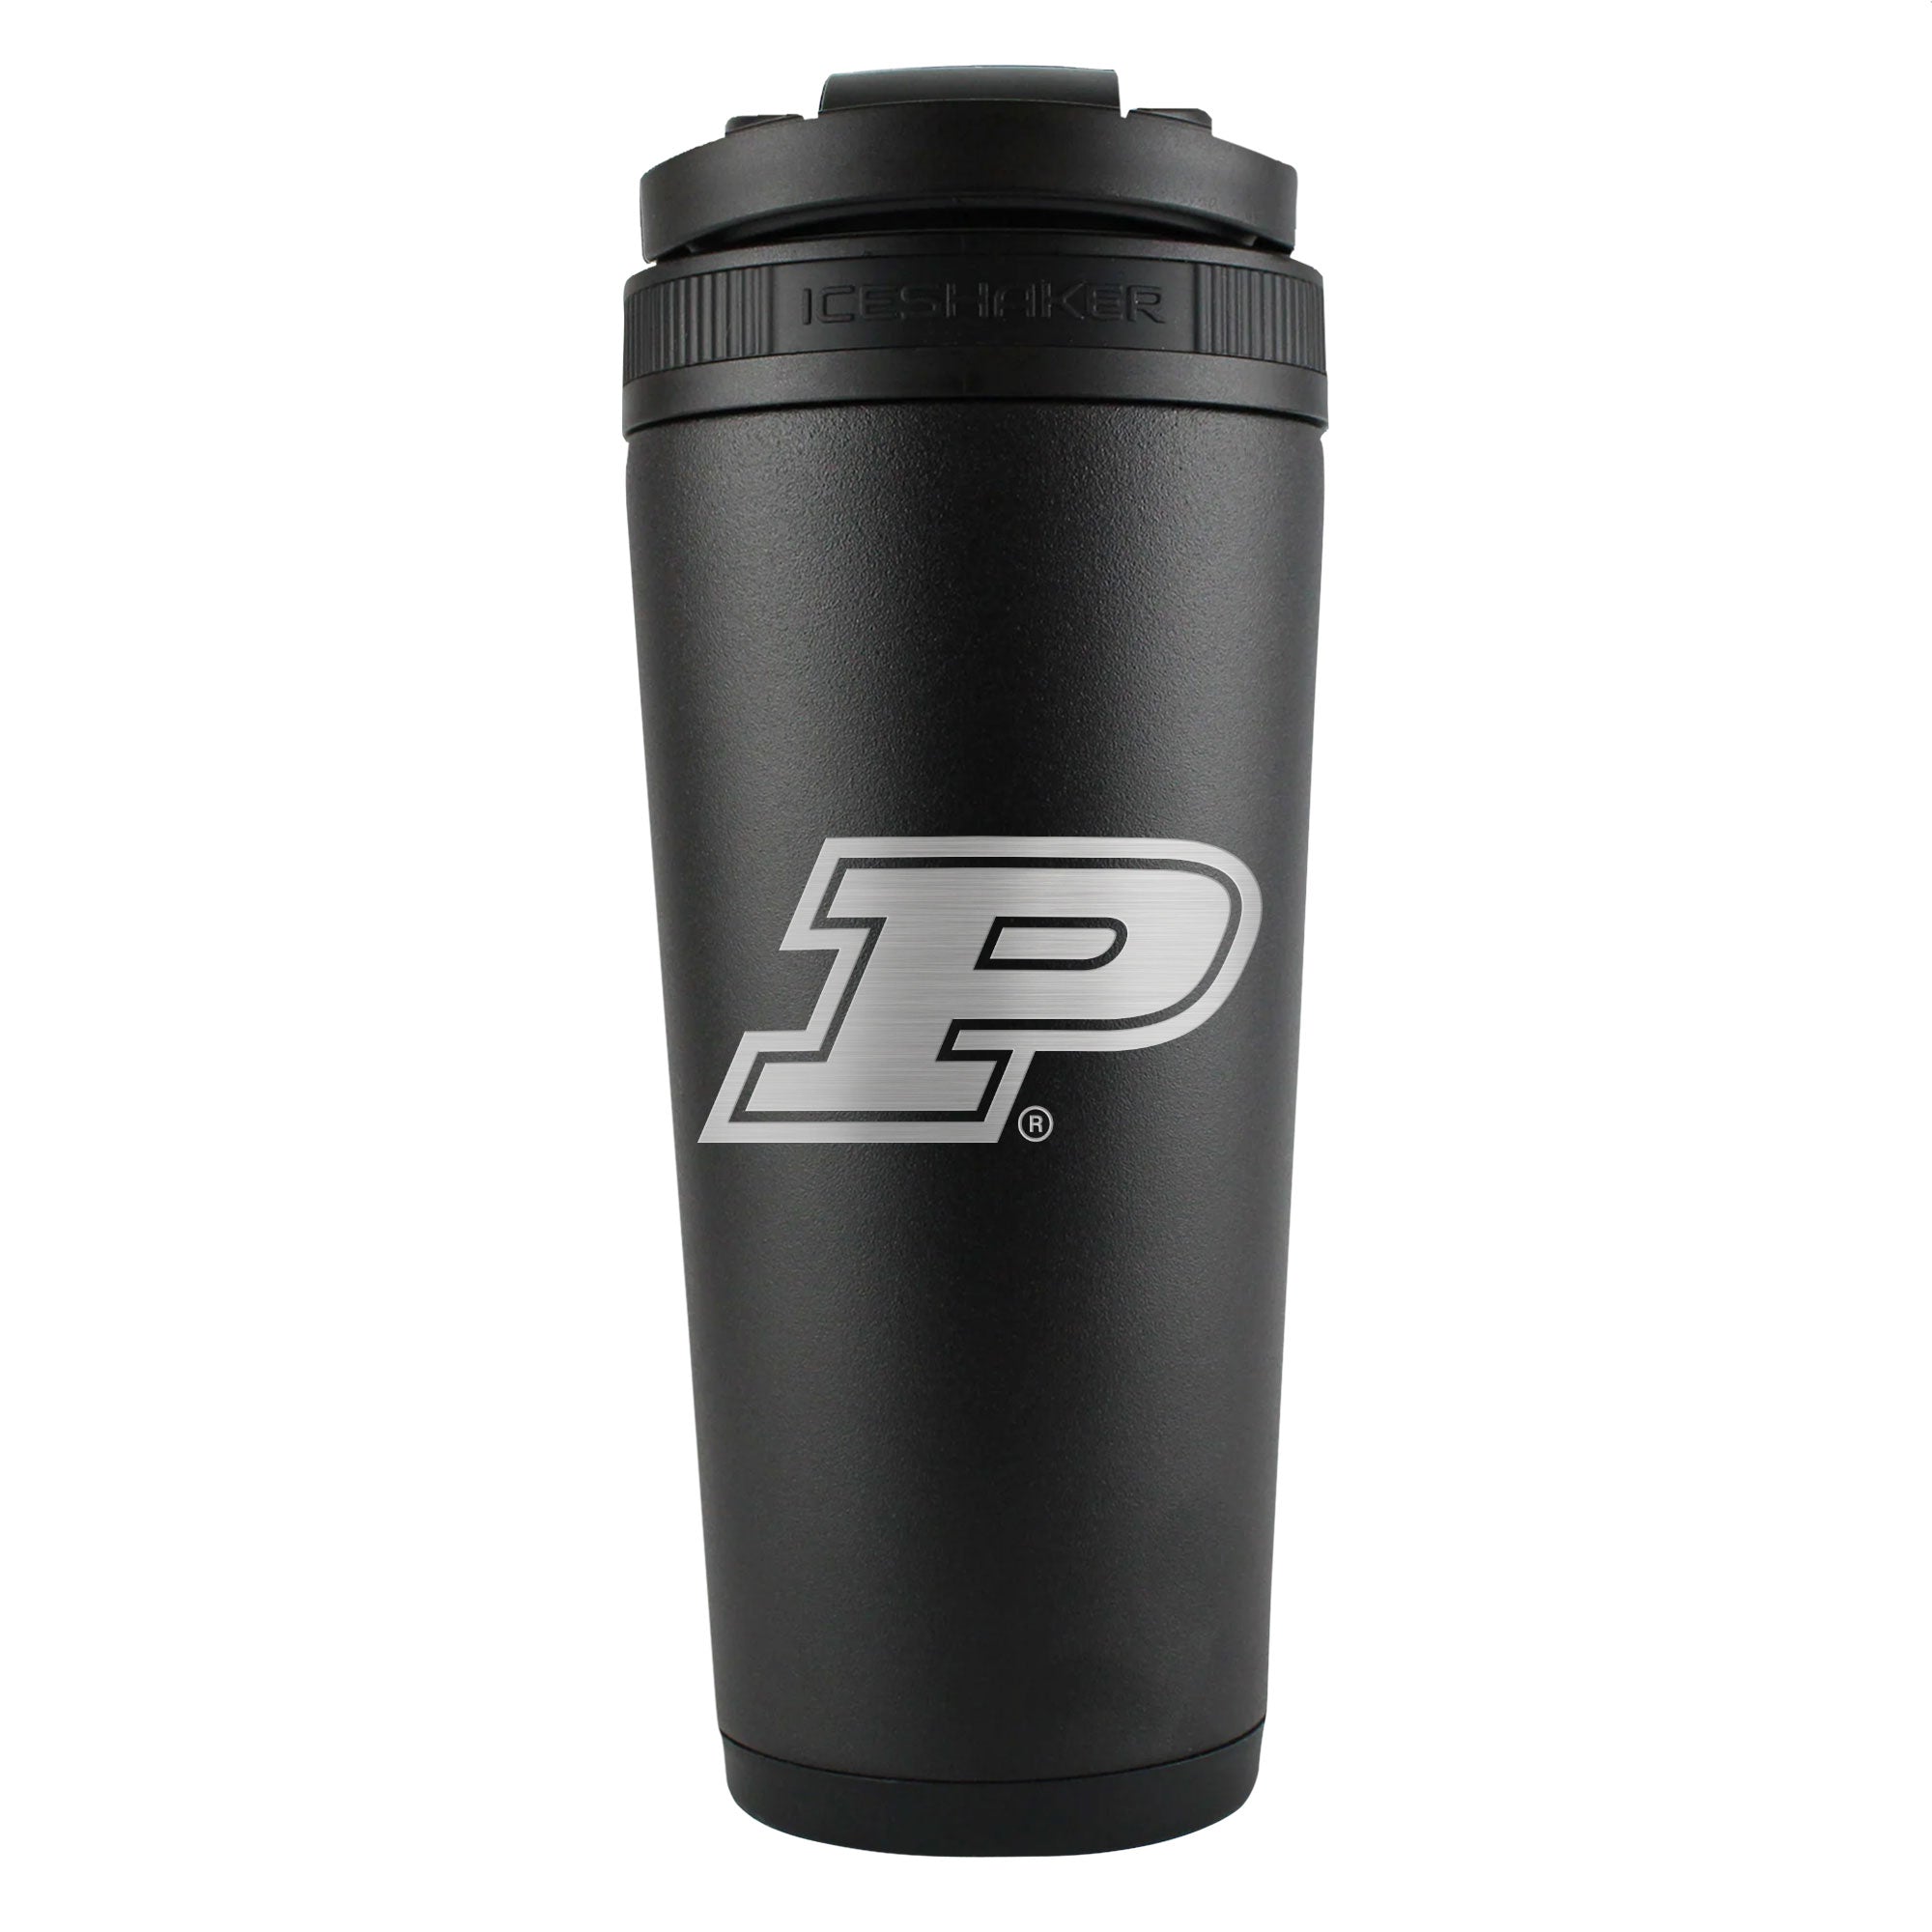 Officially Licensed Purdue University 26oz Ice Shaker